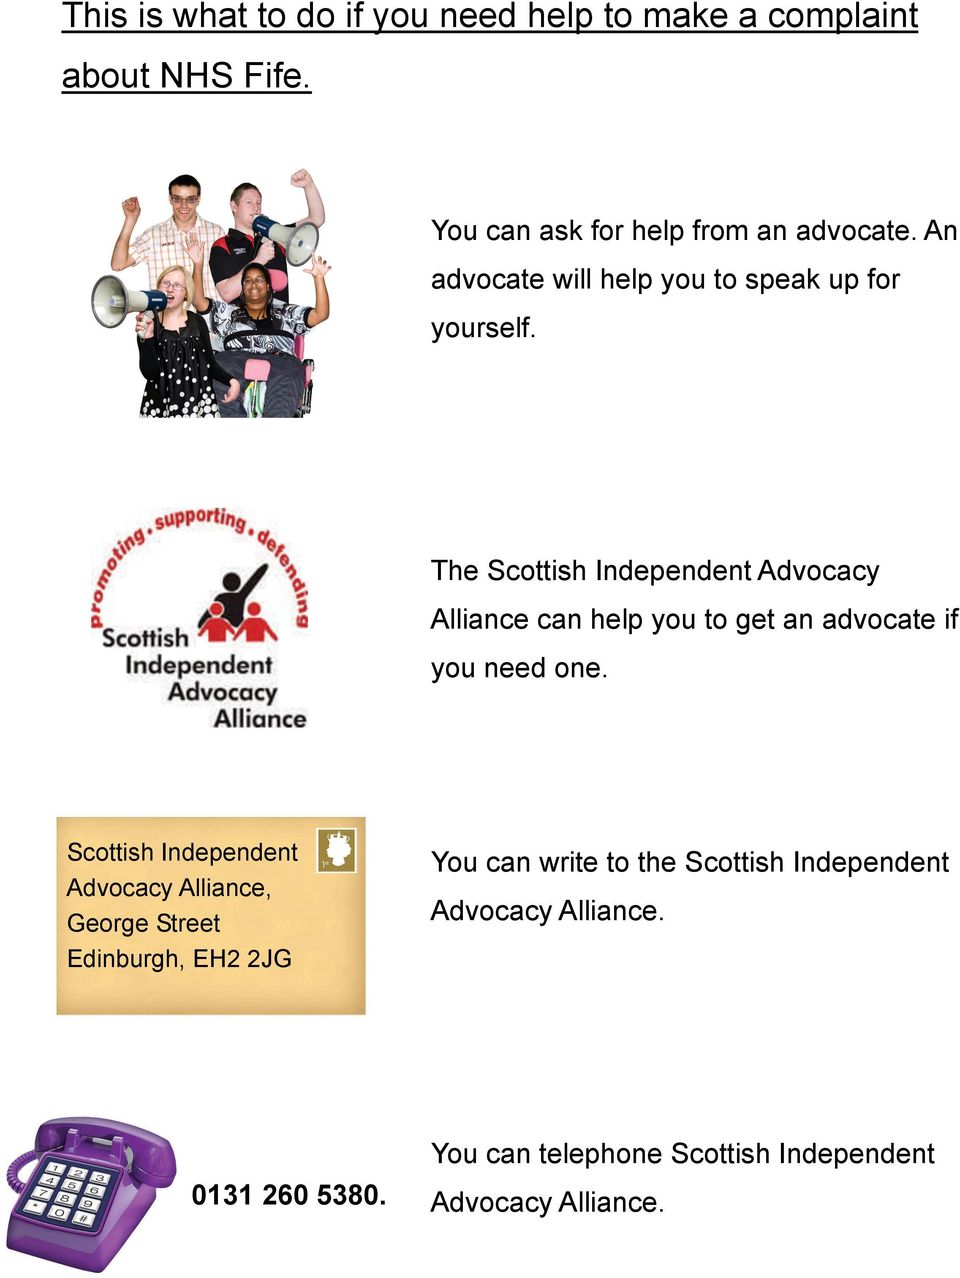 The Scottish Independent Advocacy Alliance can help you to get an advocate if you need one.